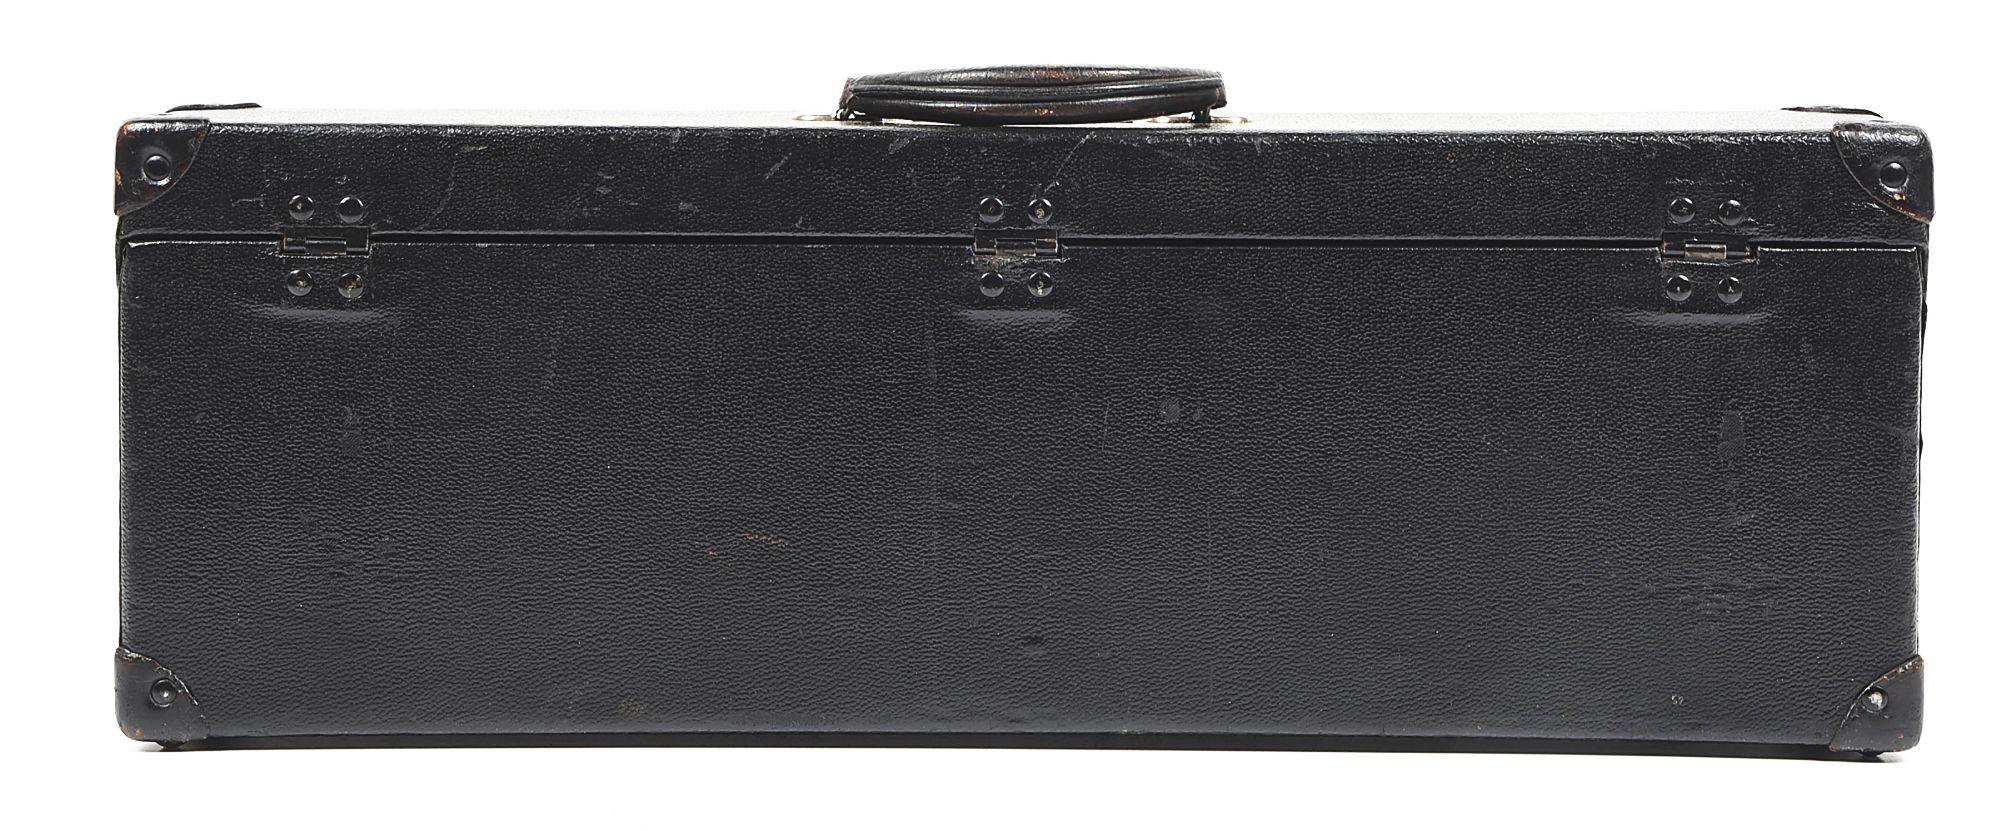 EXCEPTIONAL CONDITION ORIGINAL PURPLE LINED &#8220;F.B.I.&#8221; STYLE &#8220;BROOKS TRUNK CO&#8221;